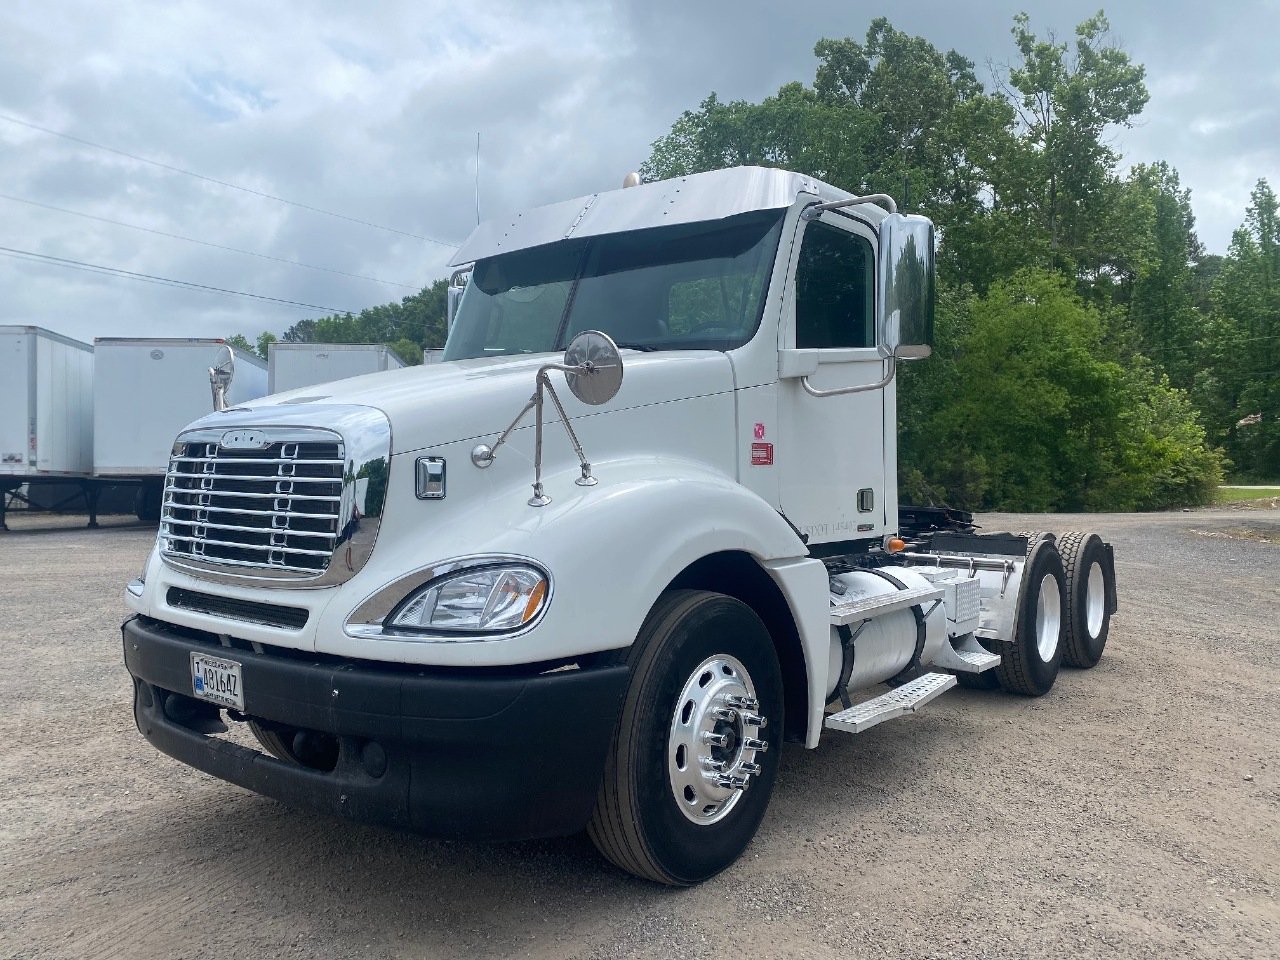 USED 2012 FREIGHTLINER COLUMBIA TANDEM AXLE DAYCAB TRUCK #15341